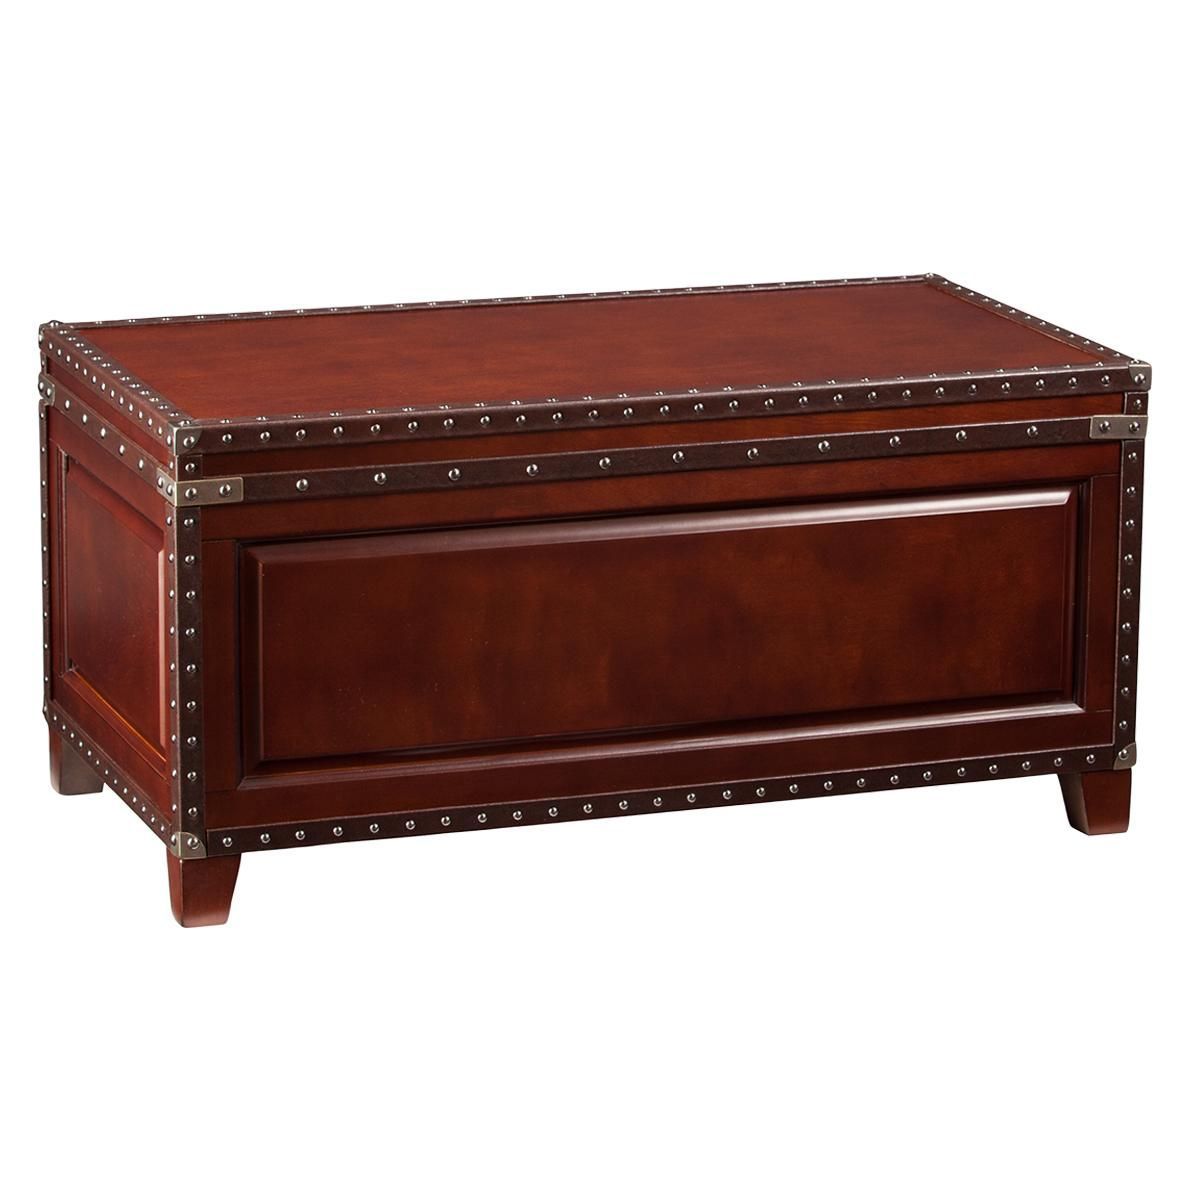 Southern Enterprises Amherst Trunk Cocktail Table | Nebraska Furniture Throughout Southern Enterprises Larksmill Coffee Tables (Gallery 13 of 20)